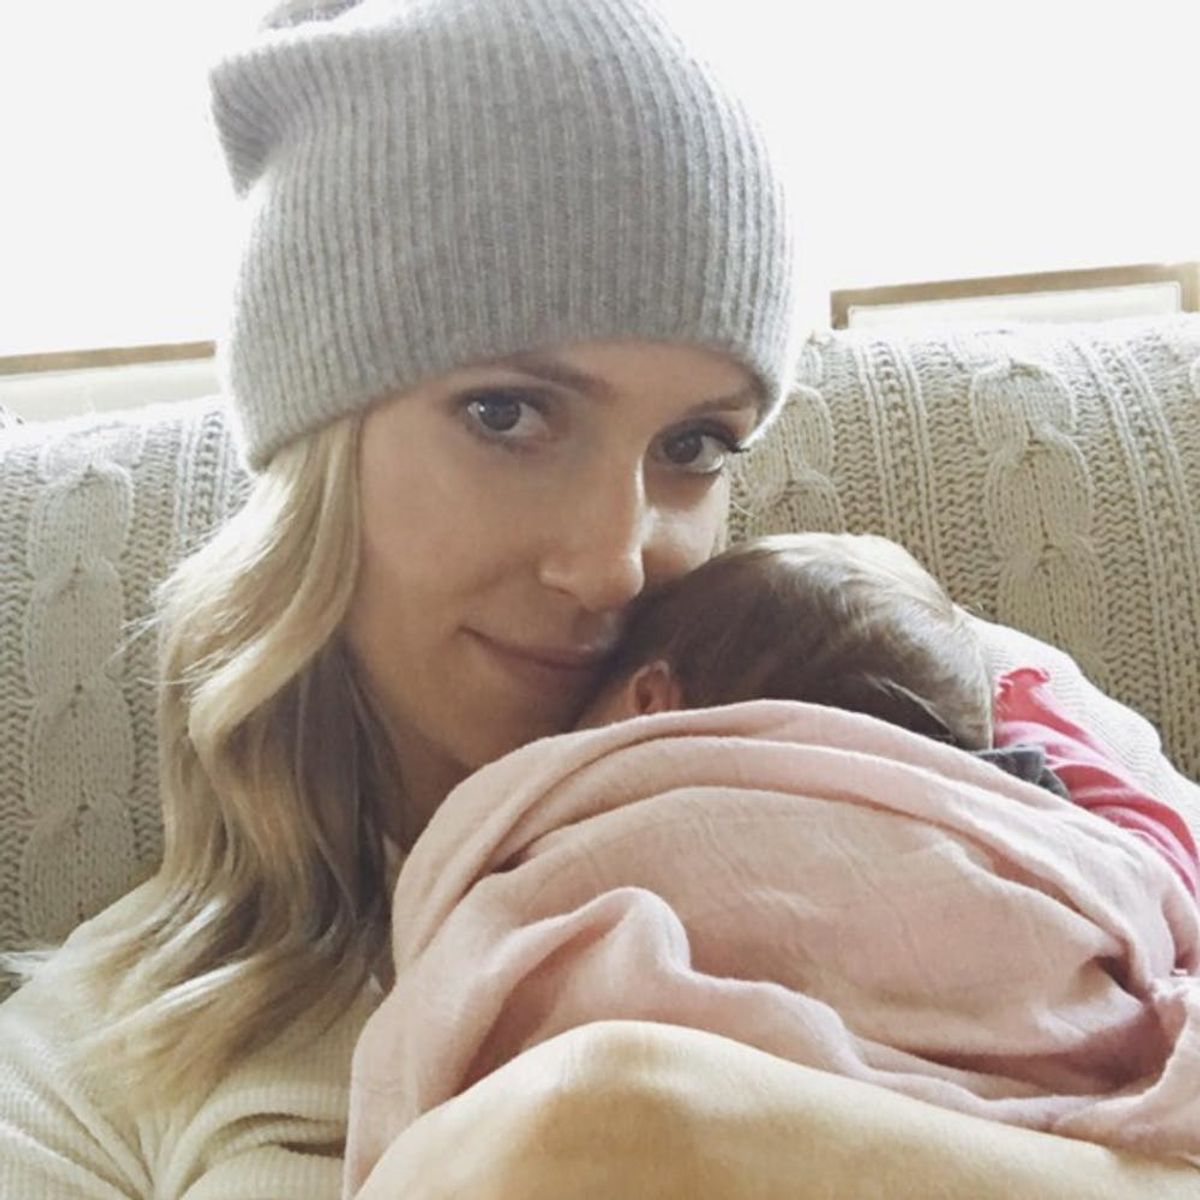 Kristin Cavallari Talks About Having a Baby After Losing Her Brother